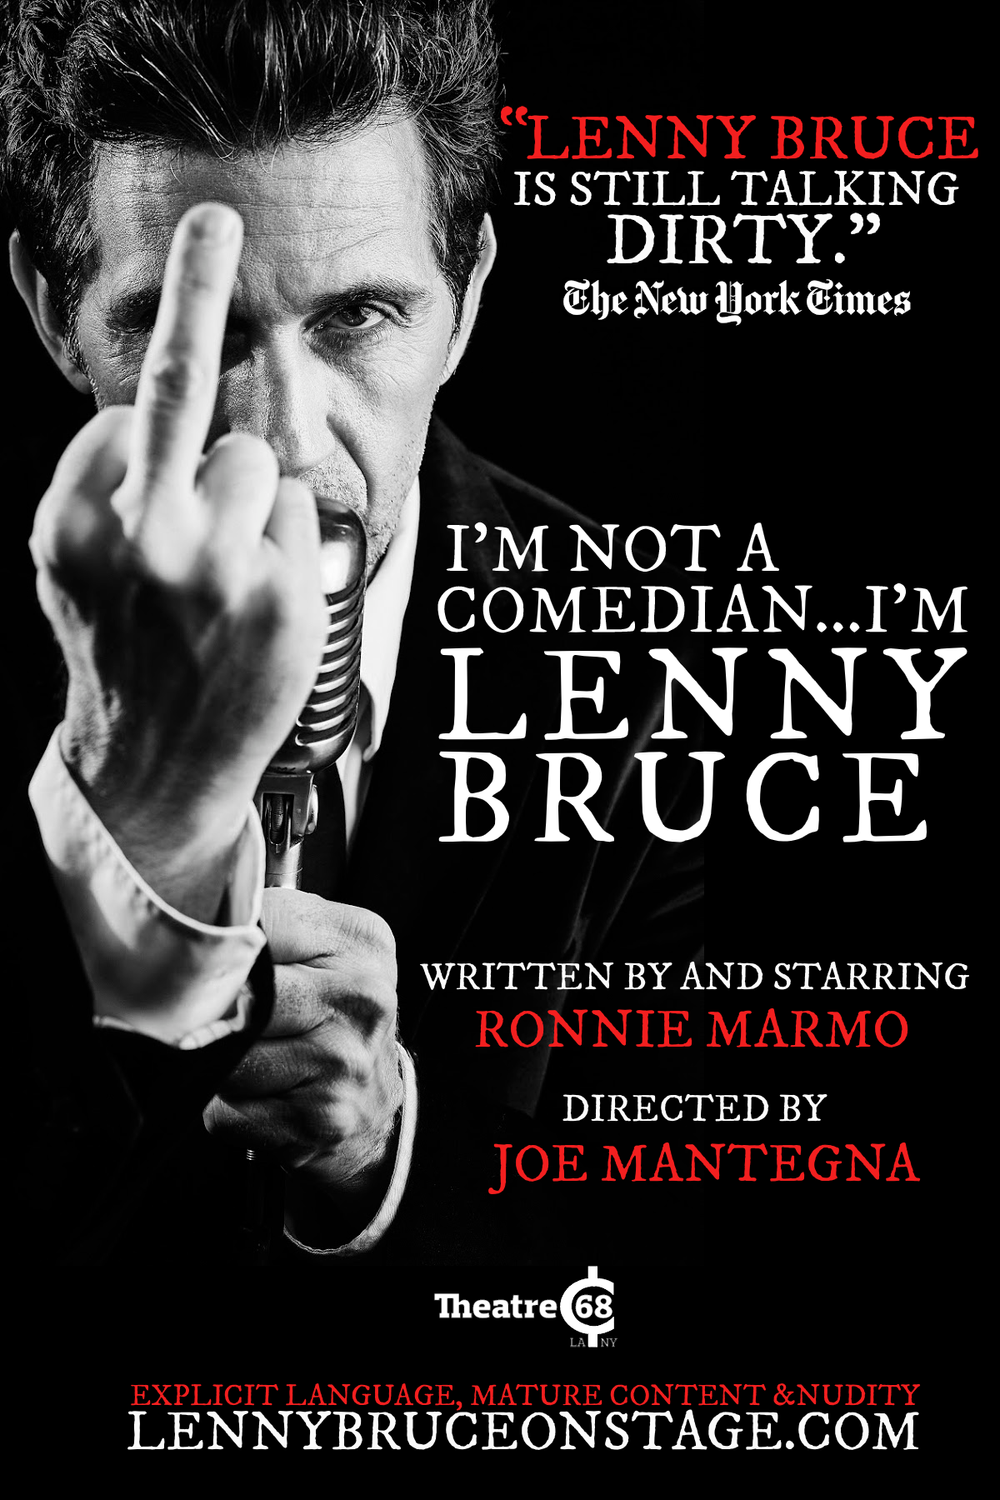 A NoHo Arts theatre review of I’M NOT A COMEDIAN...I'M LENNY BRUCE starring Ronnie Marmo at Theatre 68 Arts Complex in the NoHo Arts District.